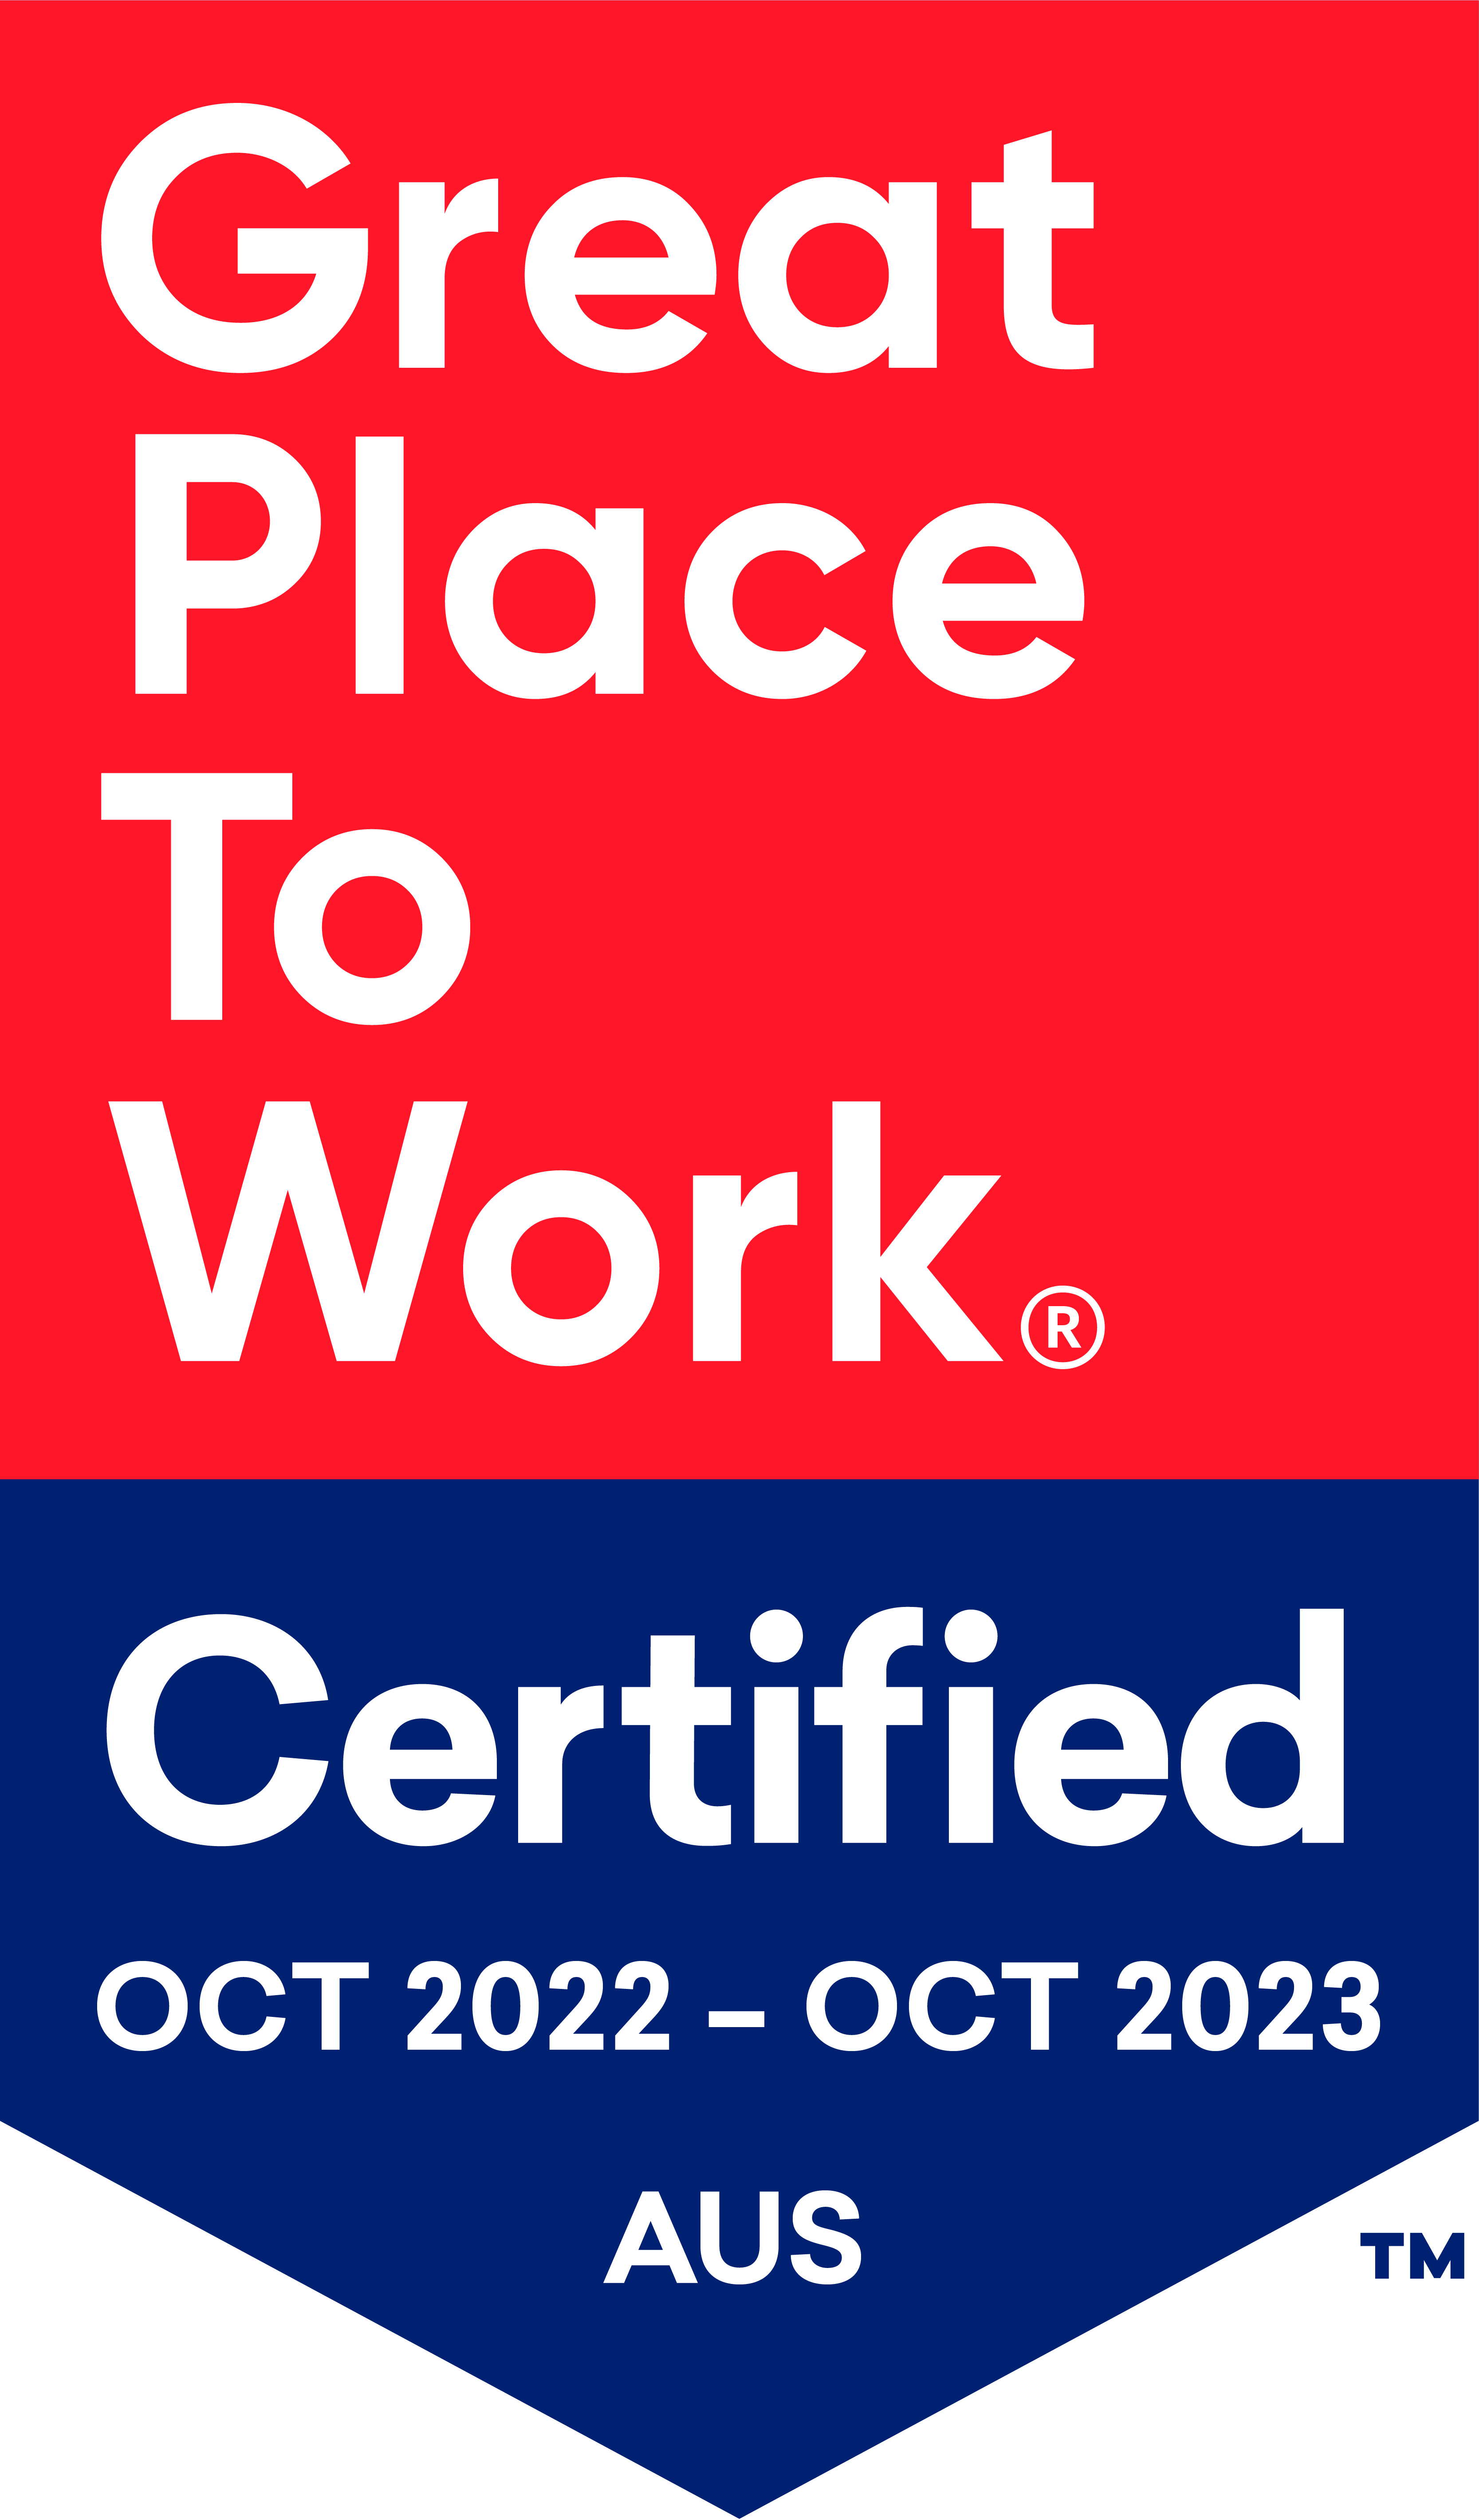 image of certified aus - great place to work